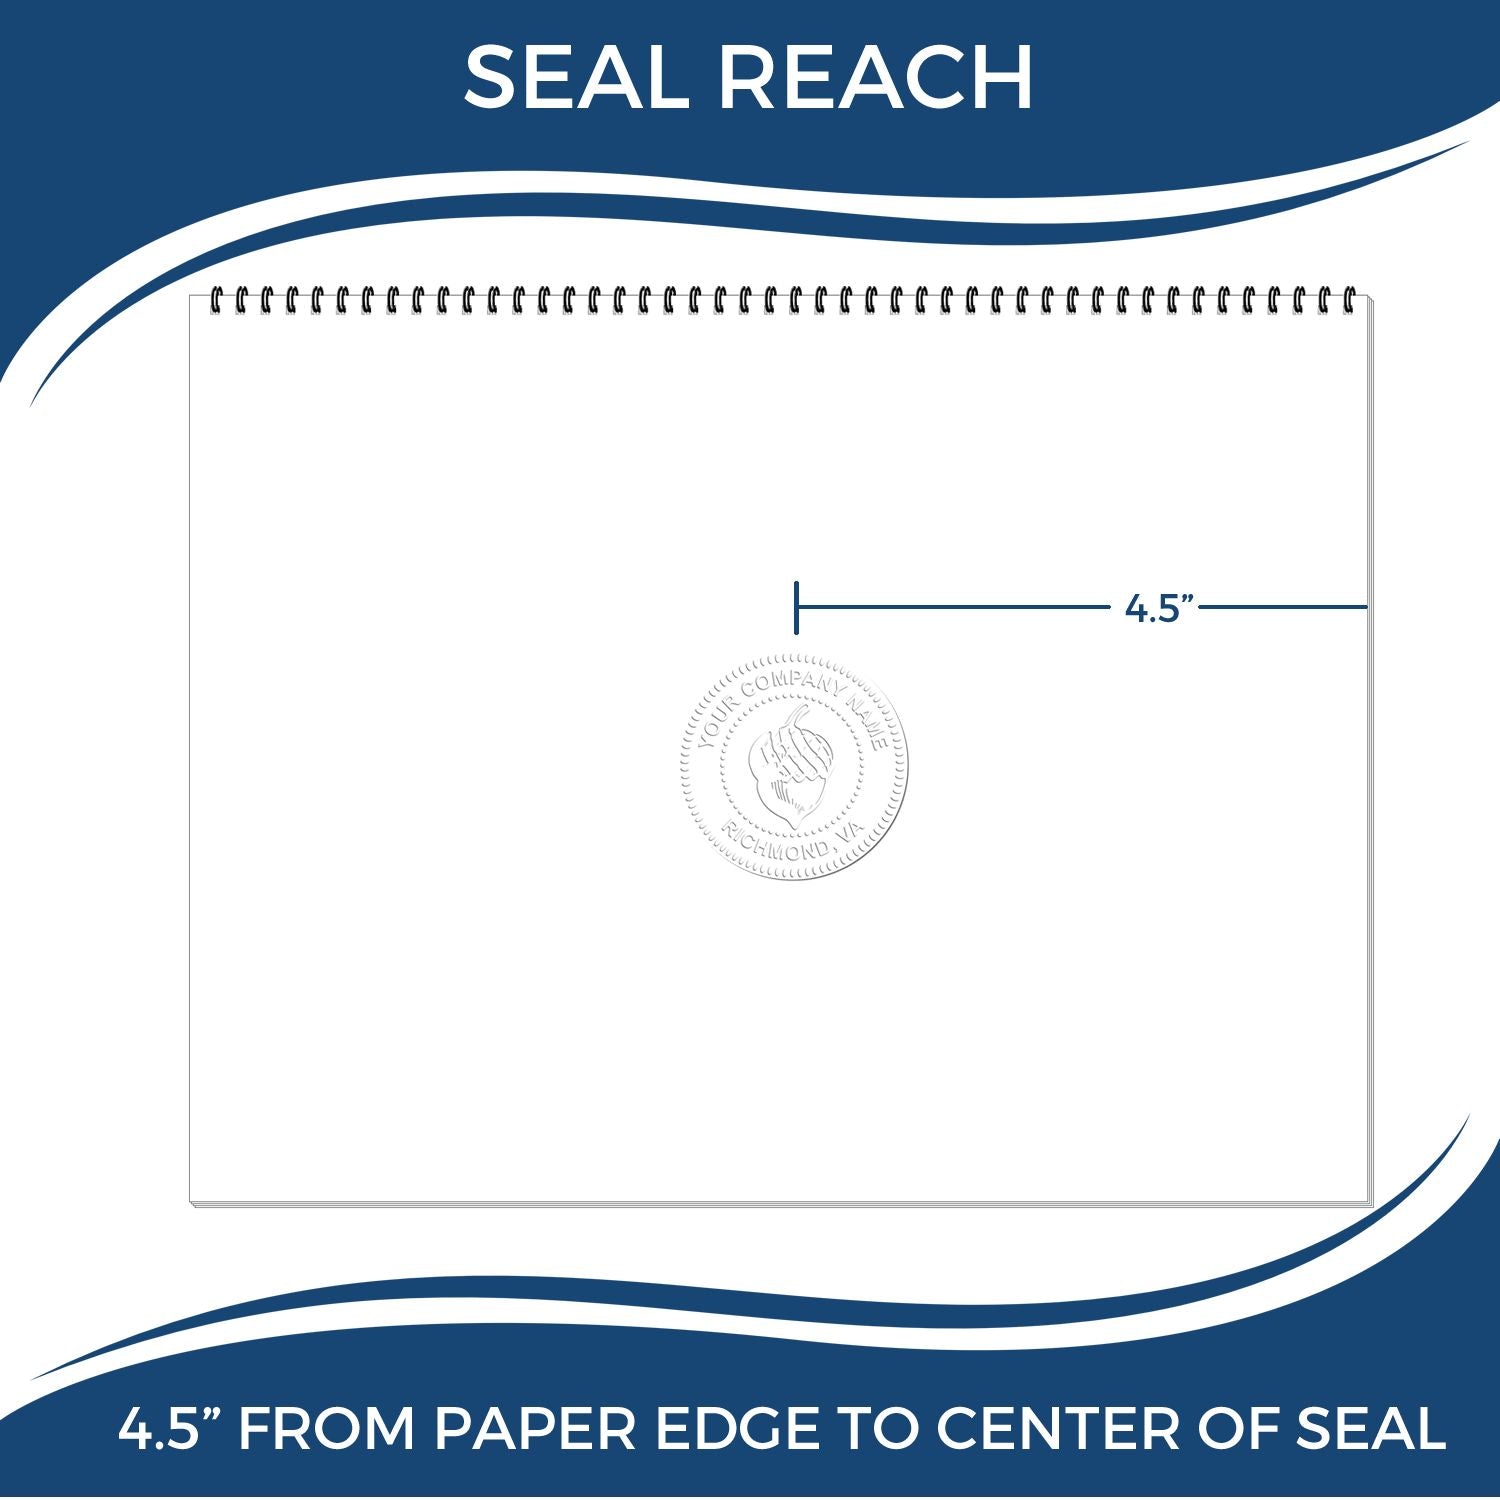 An infographic showing the seal reach which is represented by a ruler and a miniature seal image of the State of Puerto Rico Extended Long Reach Engineer Seal